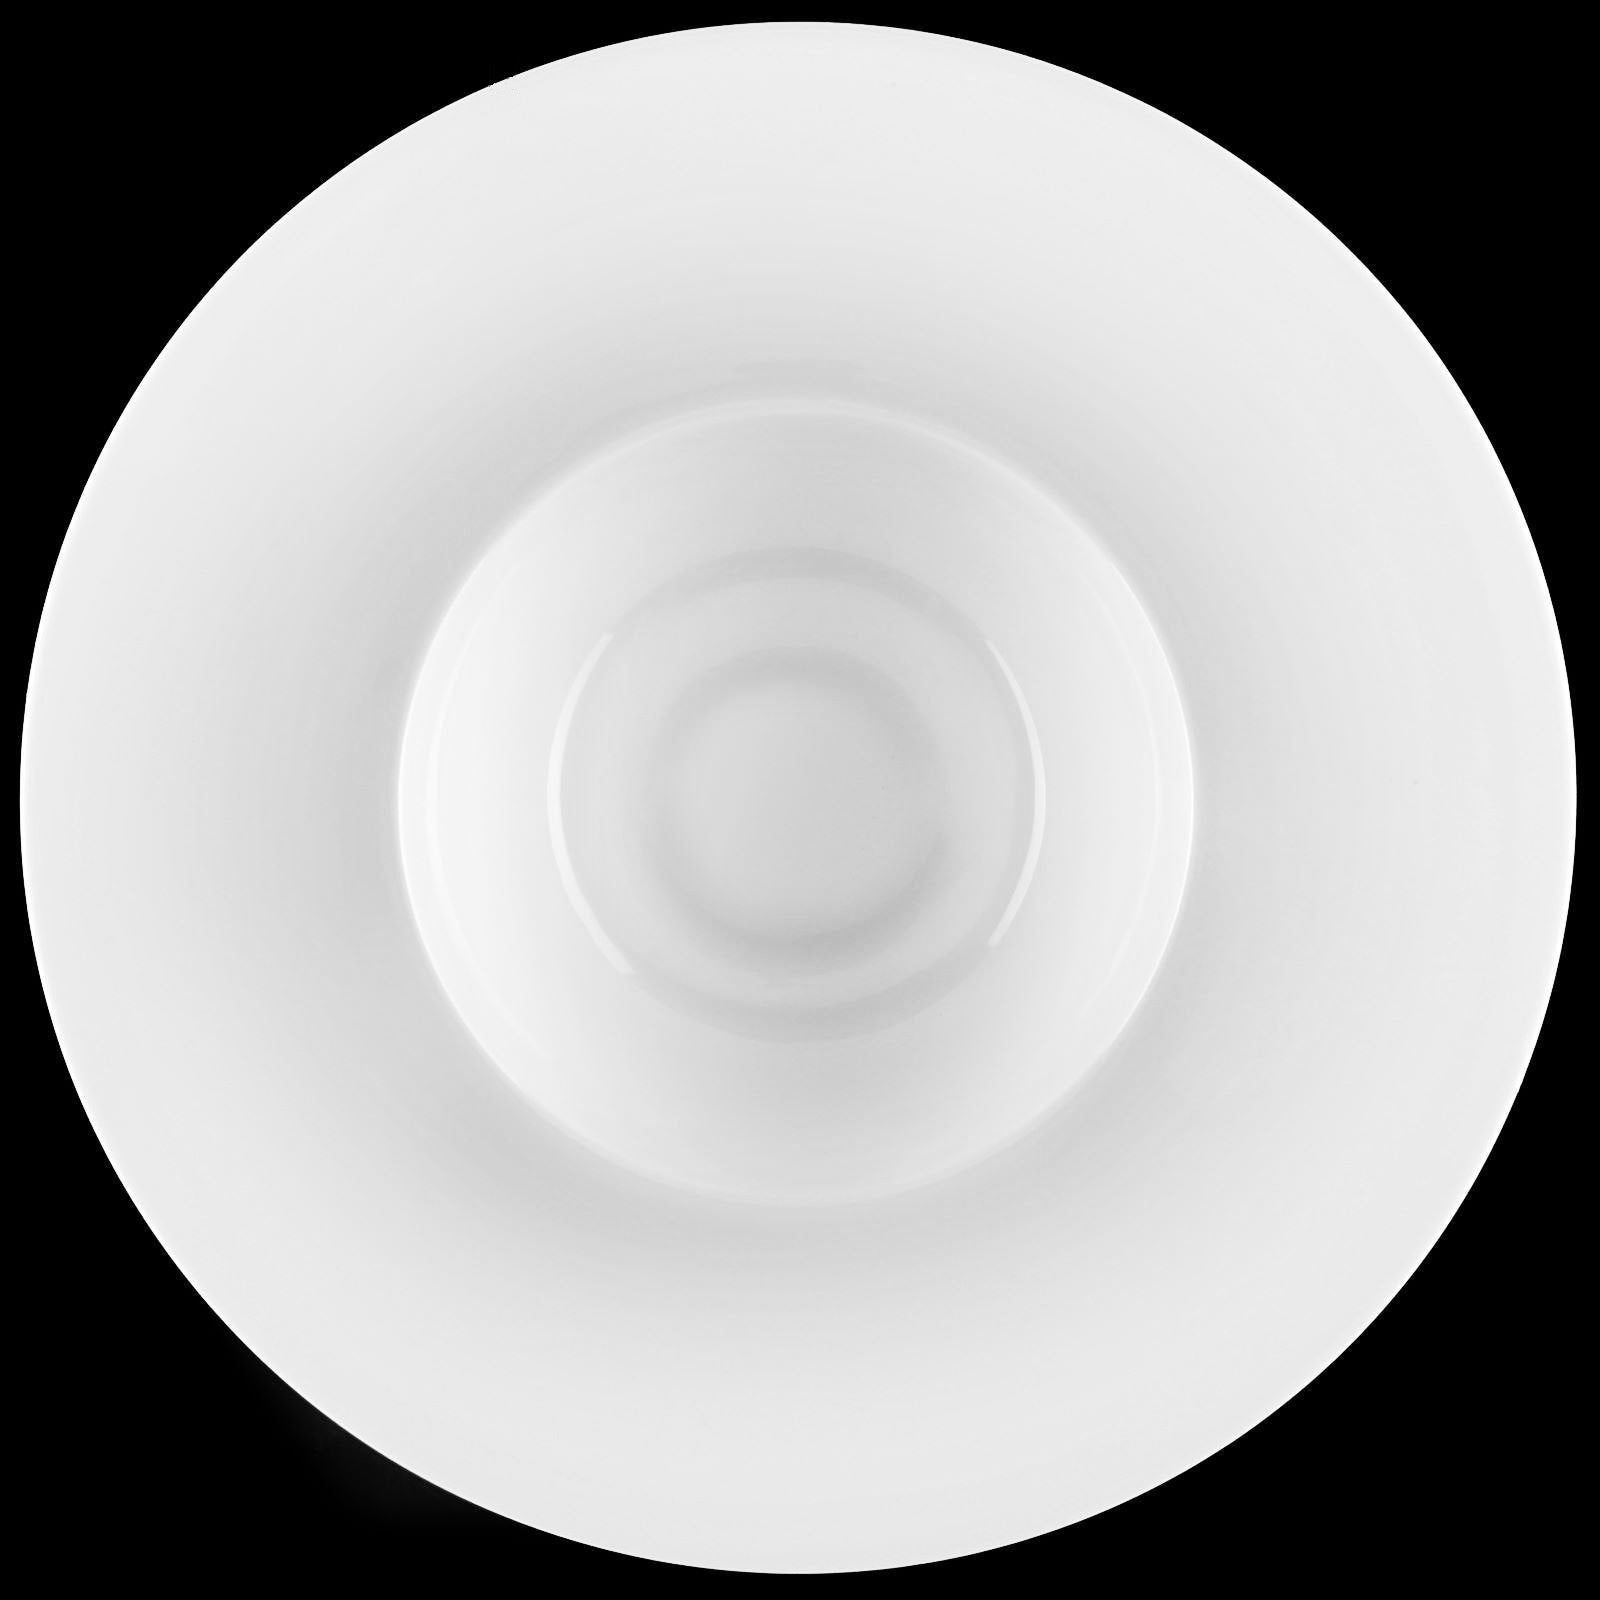 White Deep Plate 9 Inch - Fine Porcelain Dinnerware | Dishwasher and Microwave Safe, Goodies N Stuff